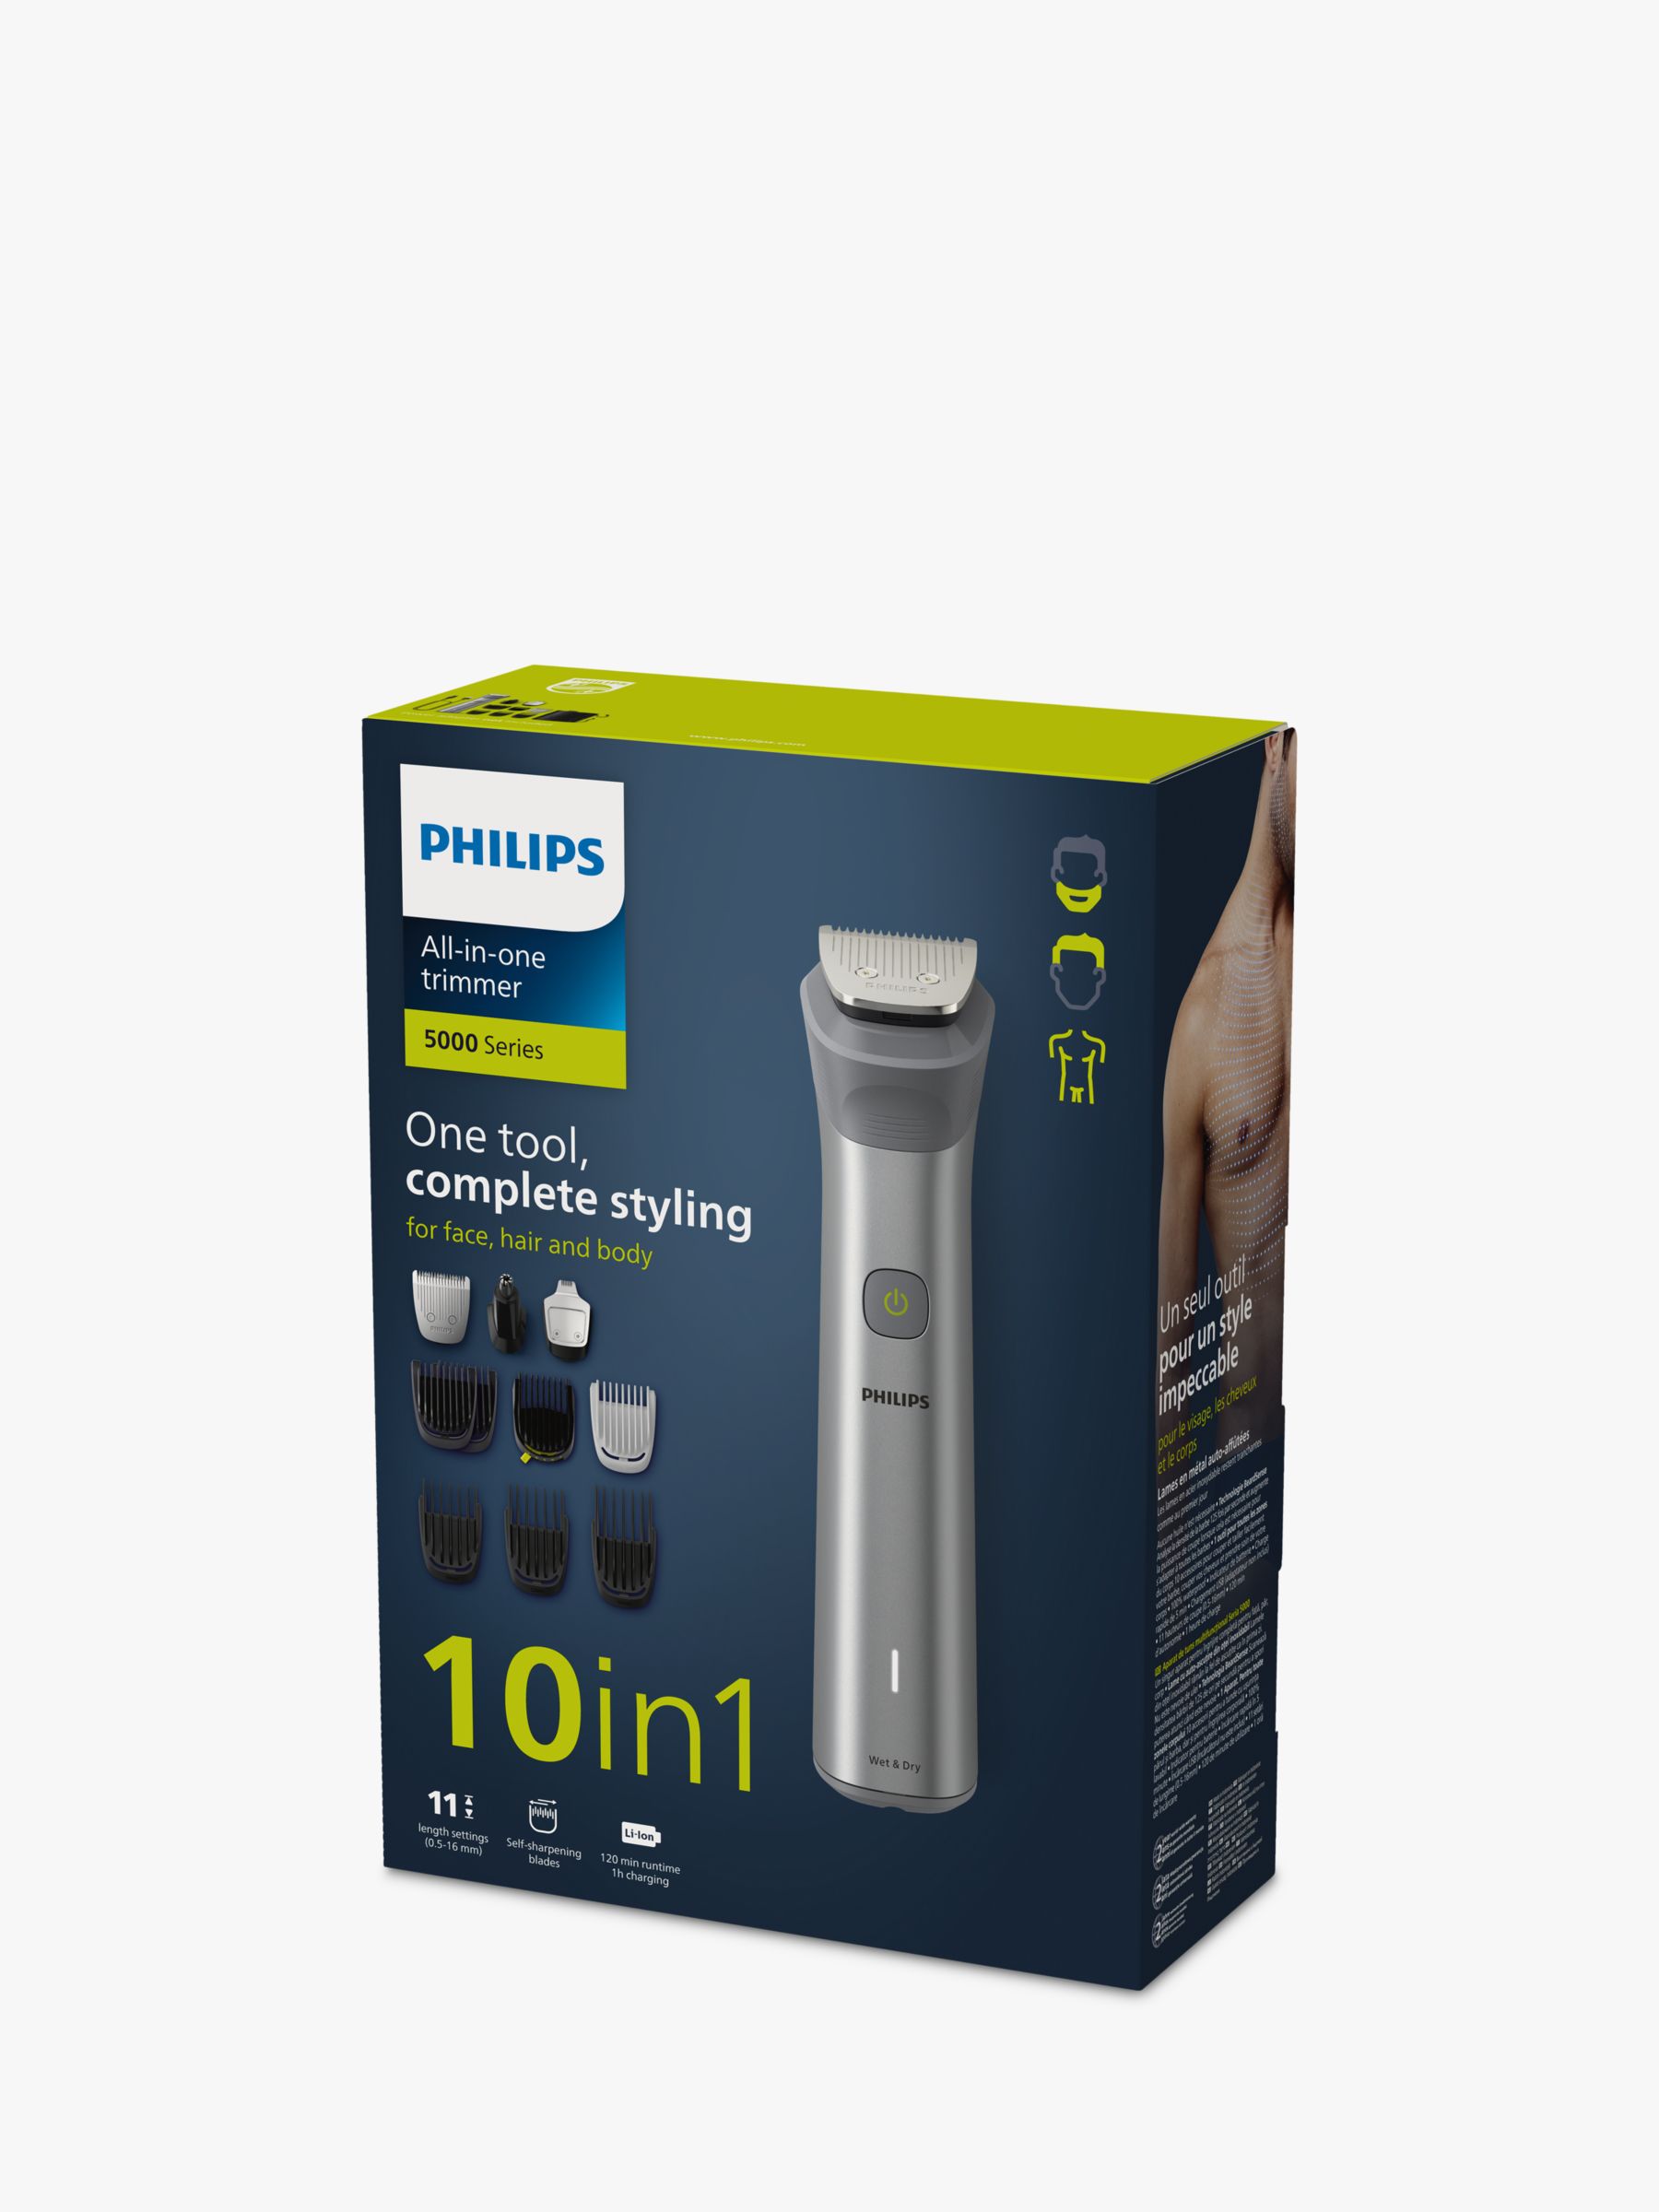 Philips Series 5000 MG5920/15,10-in-1 Multi Grooming Trimmer for Face, Head, & Body, Steel